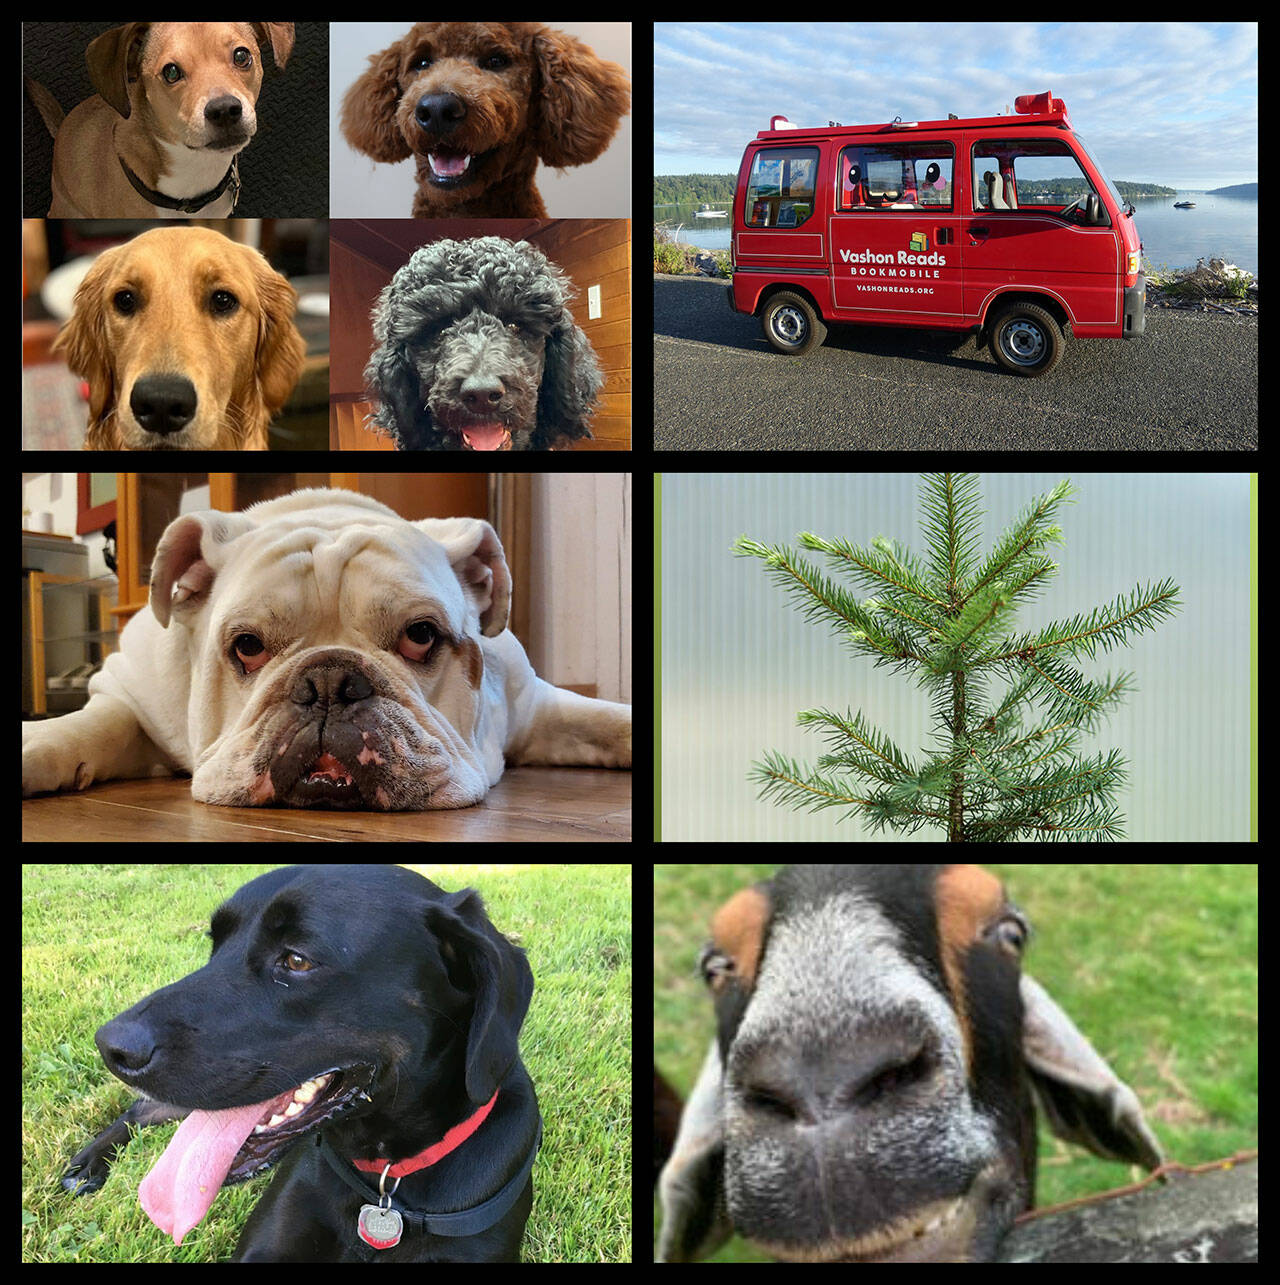 (Courtesy Photos) (Clockwise from left) This year’s unoffical mayor candidates include DOVE Project’s “Prevention Puppies of Love,” Tosho for Vashon Reads, Douglas Fir for Vashon Rotary, Winston the Goat from BrambleByrne Farm Rescue Ruminants, Buddy for Vashon HouseHold, and Buddy Conway for Vashon Island Pet Protectors.